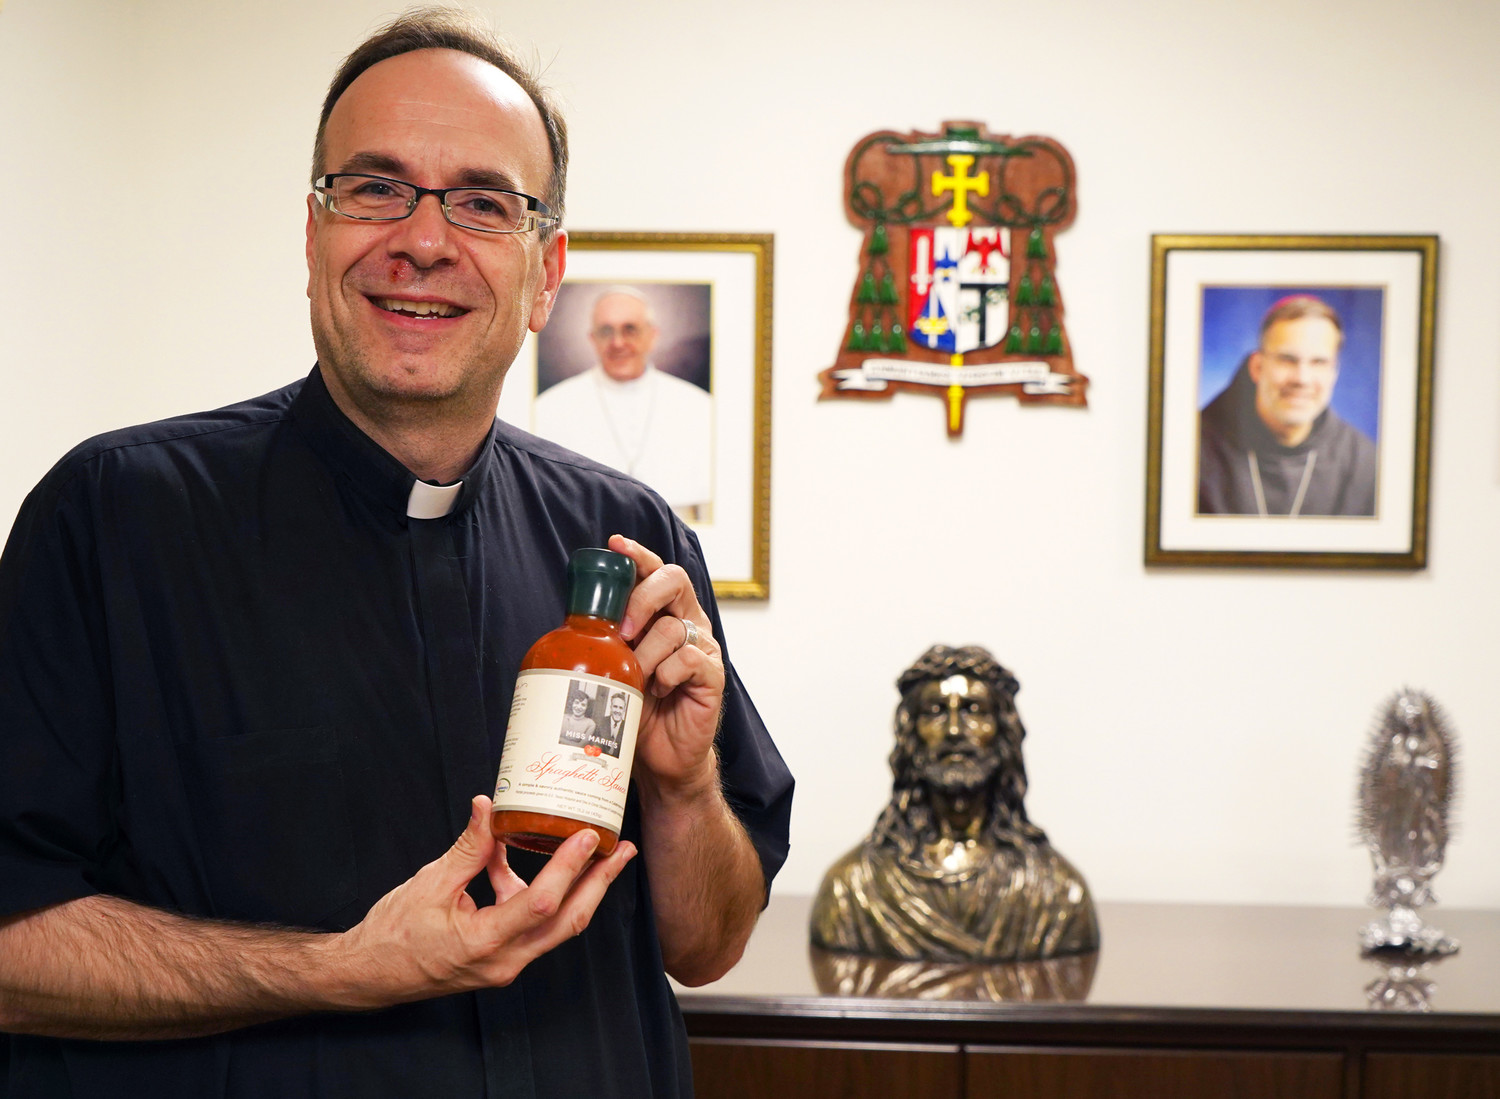 Father Jim Sichko poses with a bottle of Miss Marie’s Spaghetti Sauce at the offices of the Diocese of Lexington, Ky., on Oct. 26. Father Jim used his mother’s tomato sauce recipe to create the product and is donating part of the proceeds of sauce sales to the Lexington Diocese and Southeast Texas Hospice.